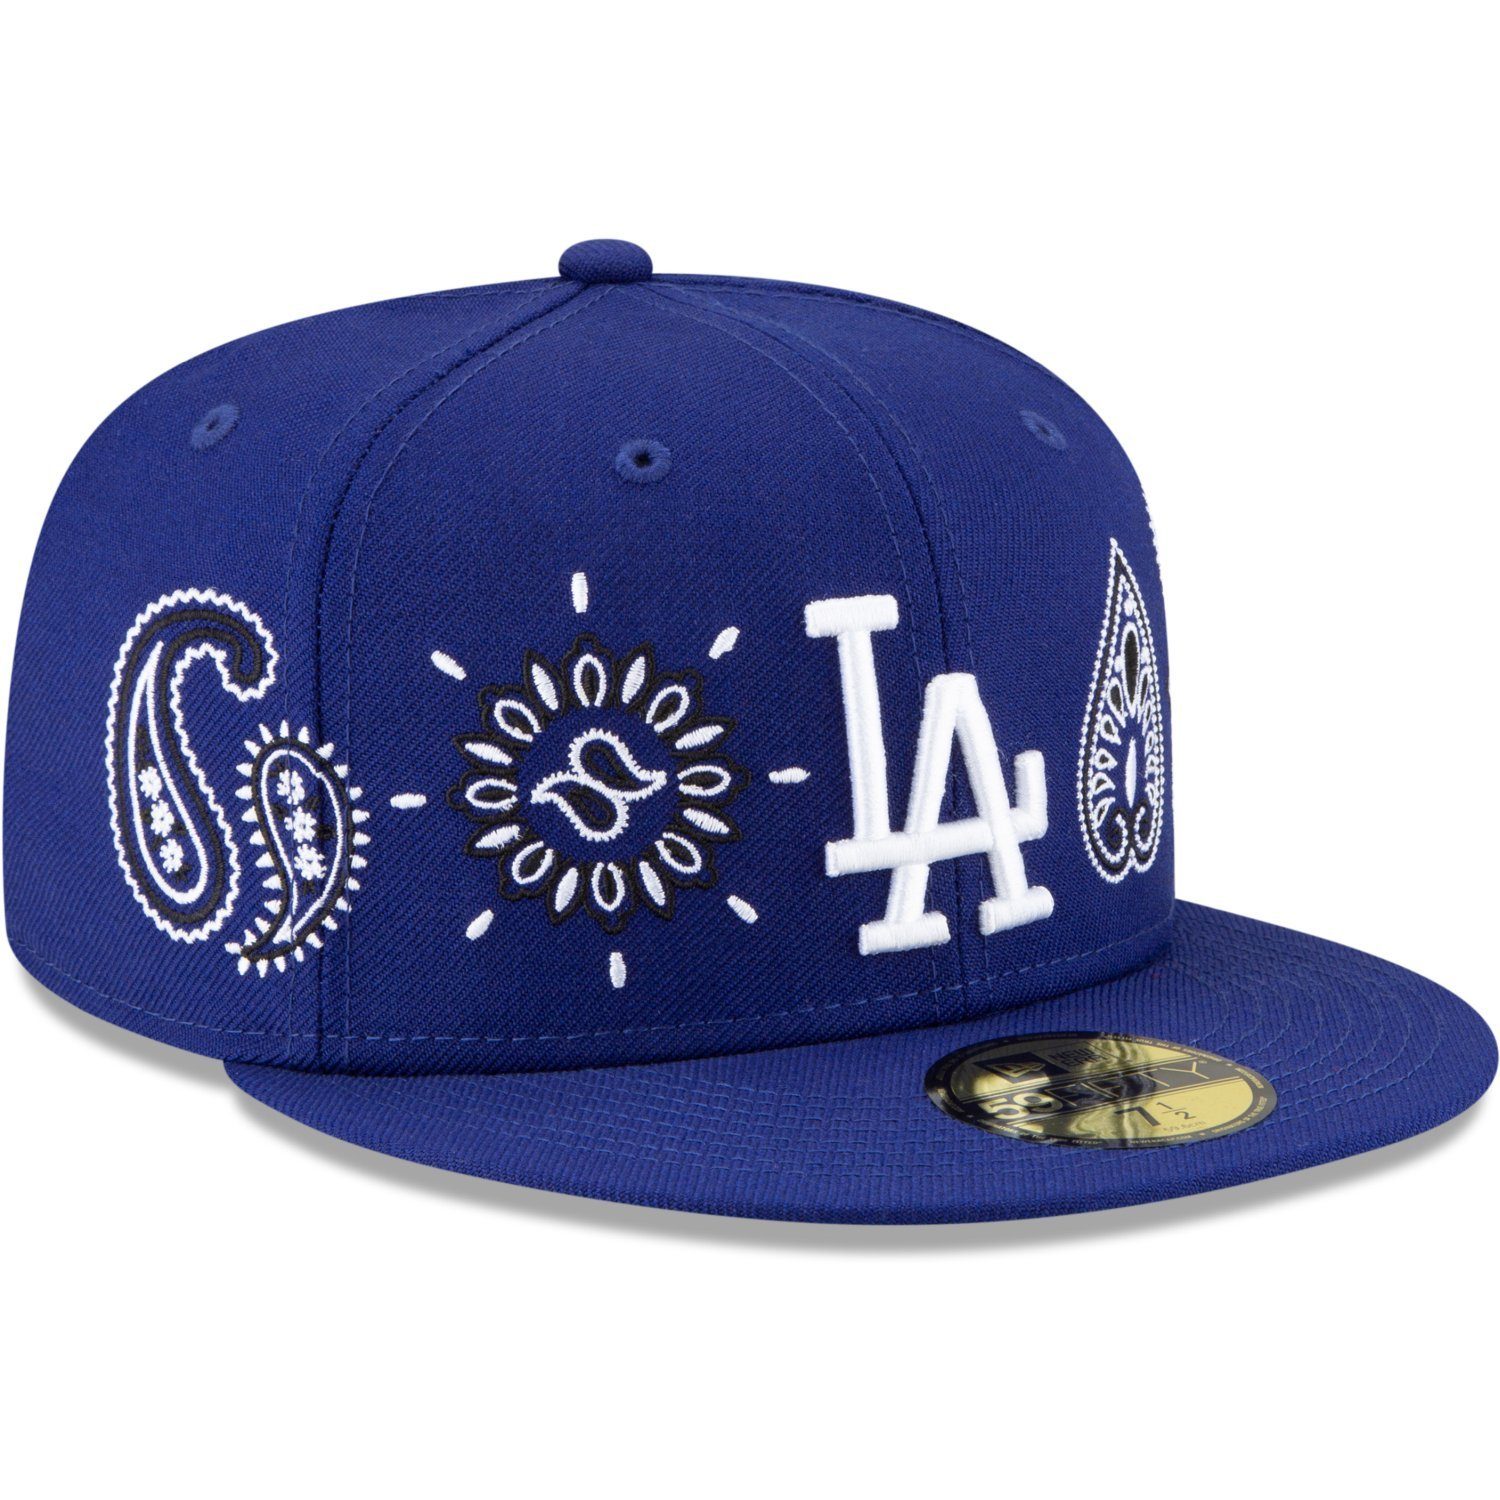 59Fifty Angeles Los New Fitted Cap PAISLEY Dodgers Era